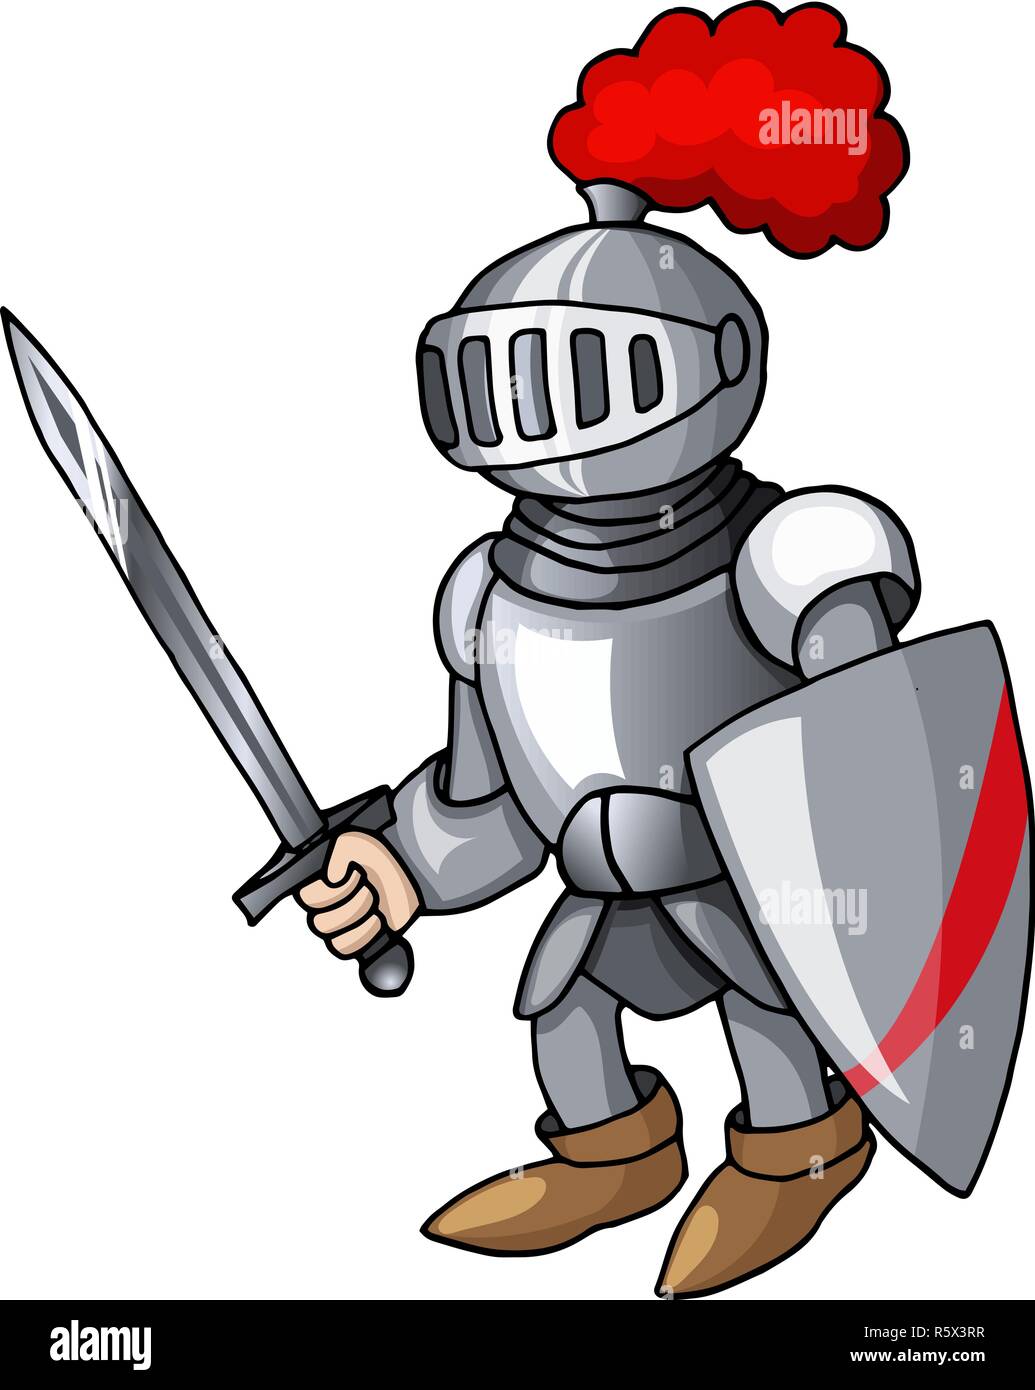 Cartoon medieval knight with shield and sword, isolated on white background Stock Vector